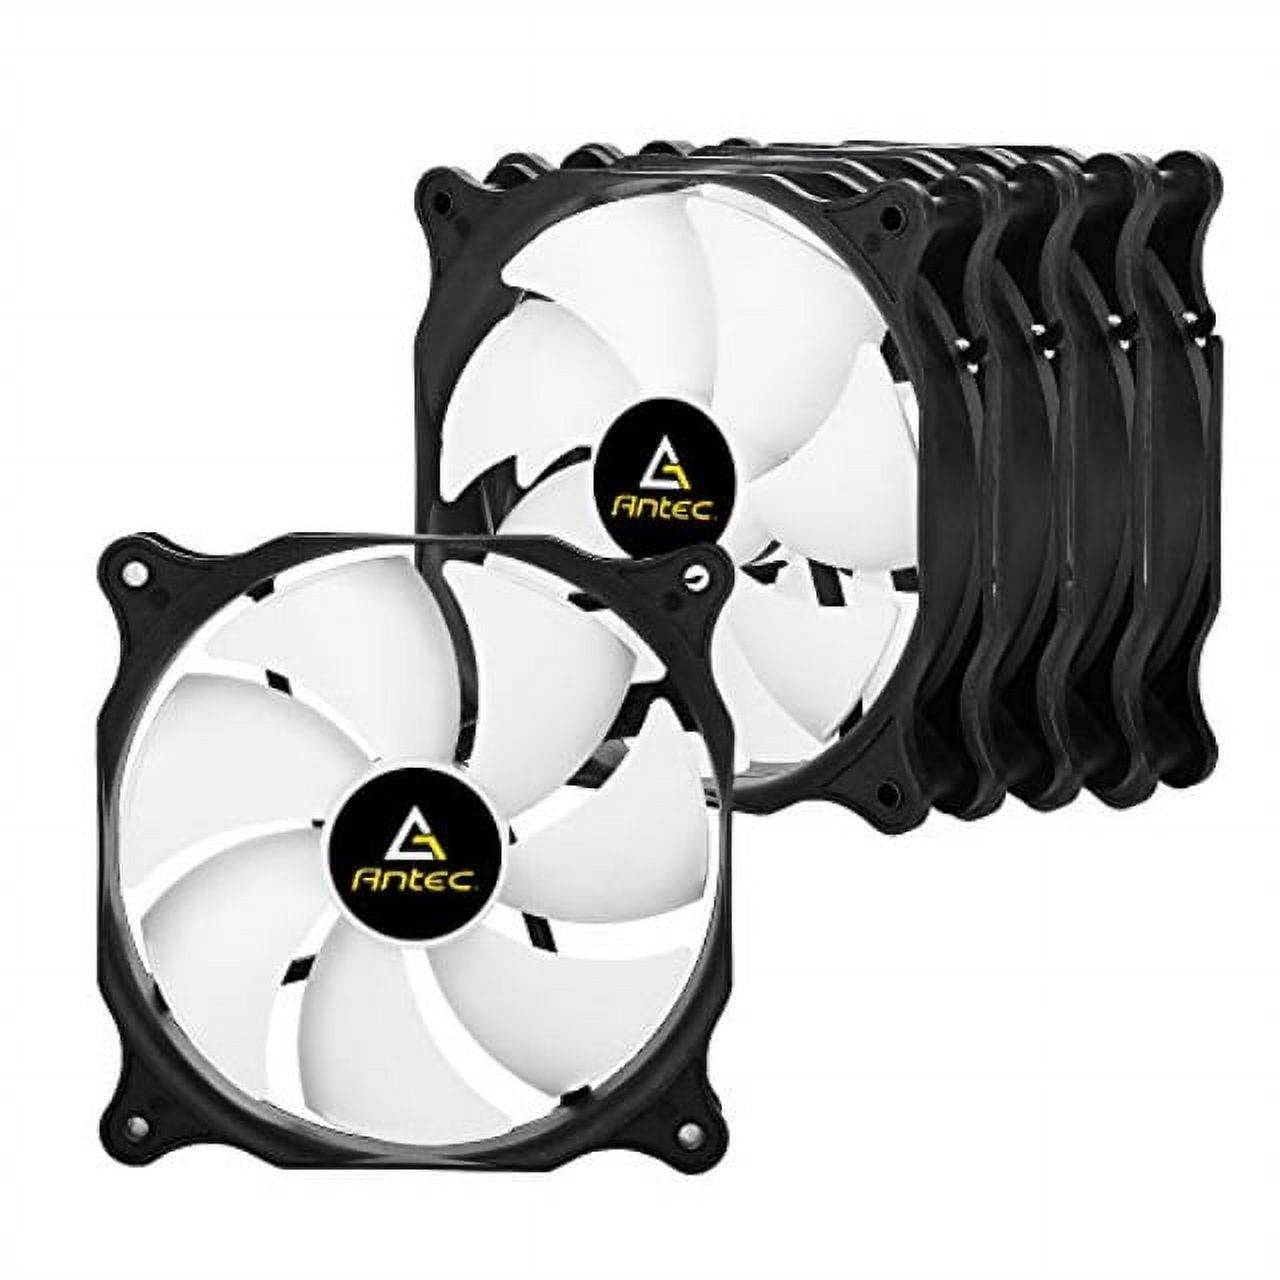 antec 120mm case fan, pc case fan high performance, 3-pin connector, f12 series 5 packs - image 1 of 7